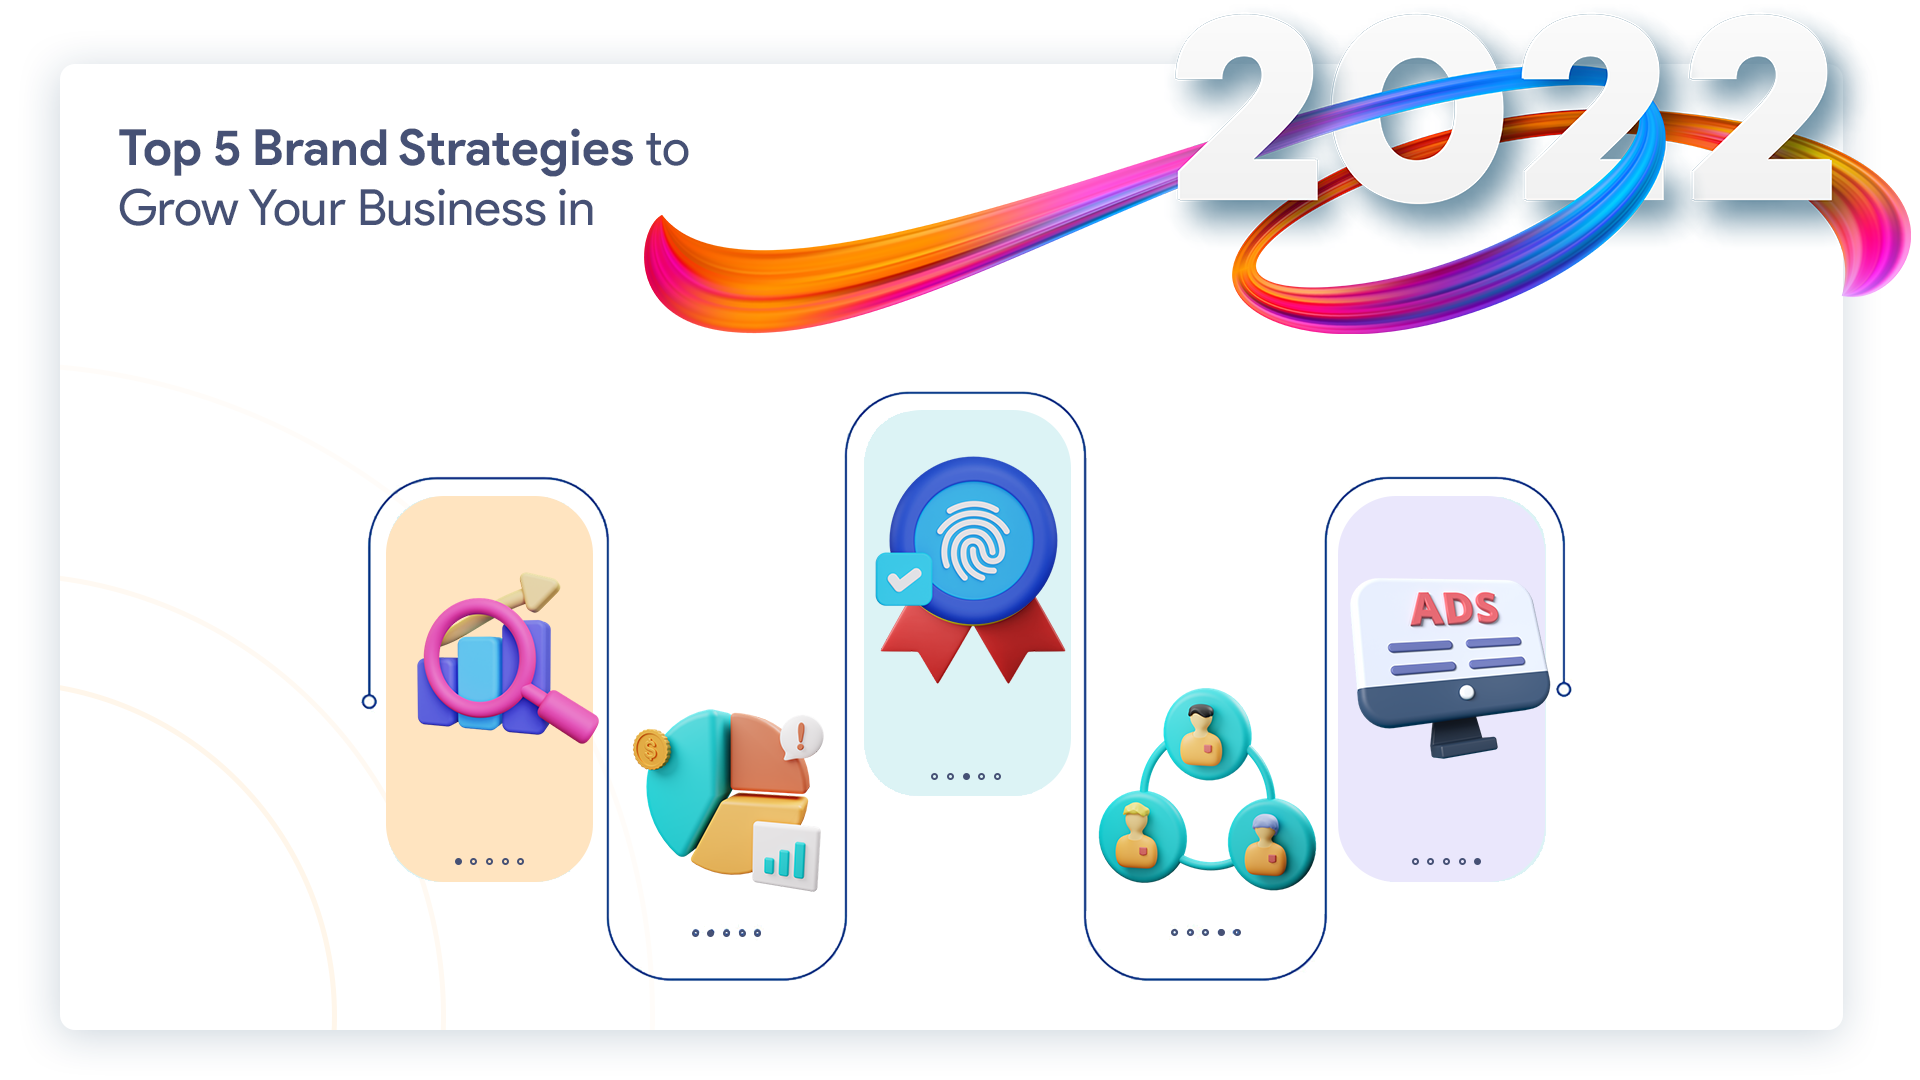 Hero Image for the Blog Top 5 Brand Strategies to Grow Your Business in 2022